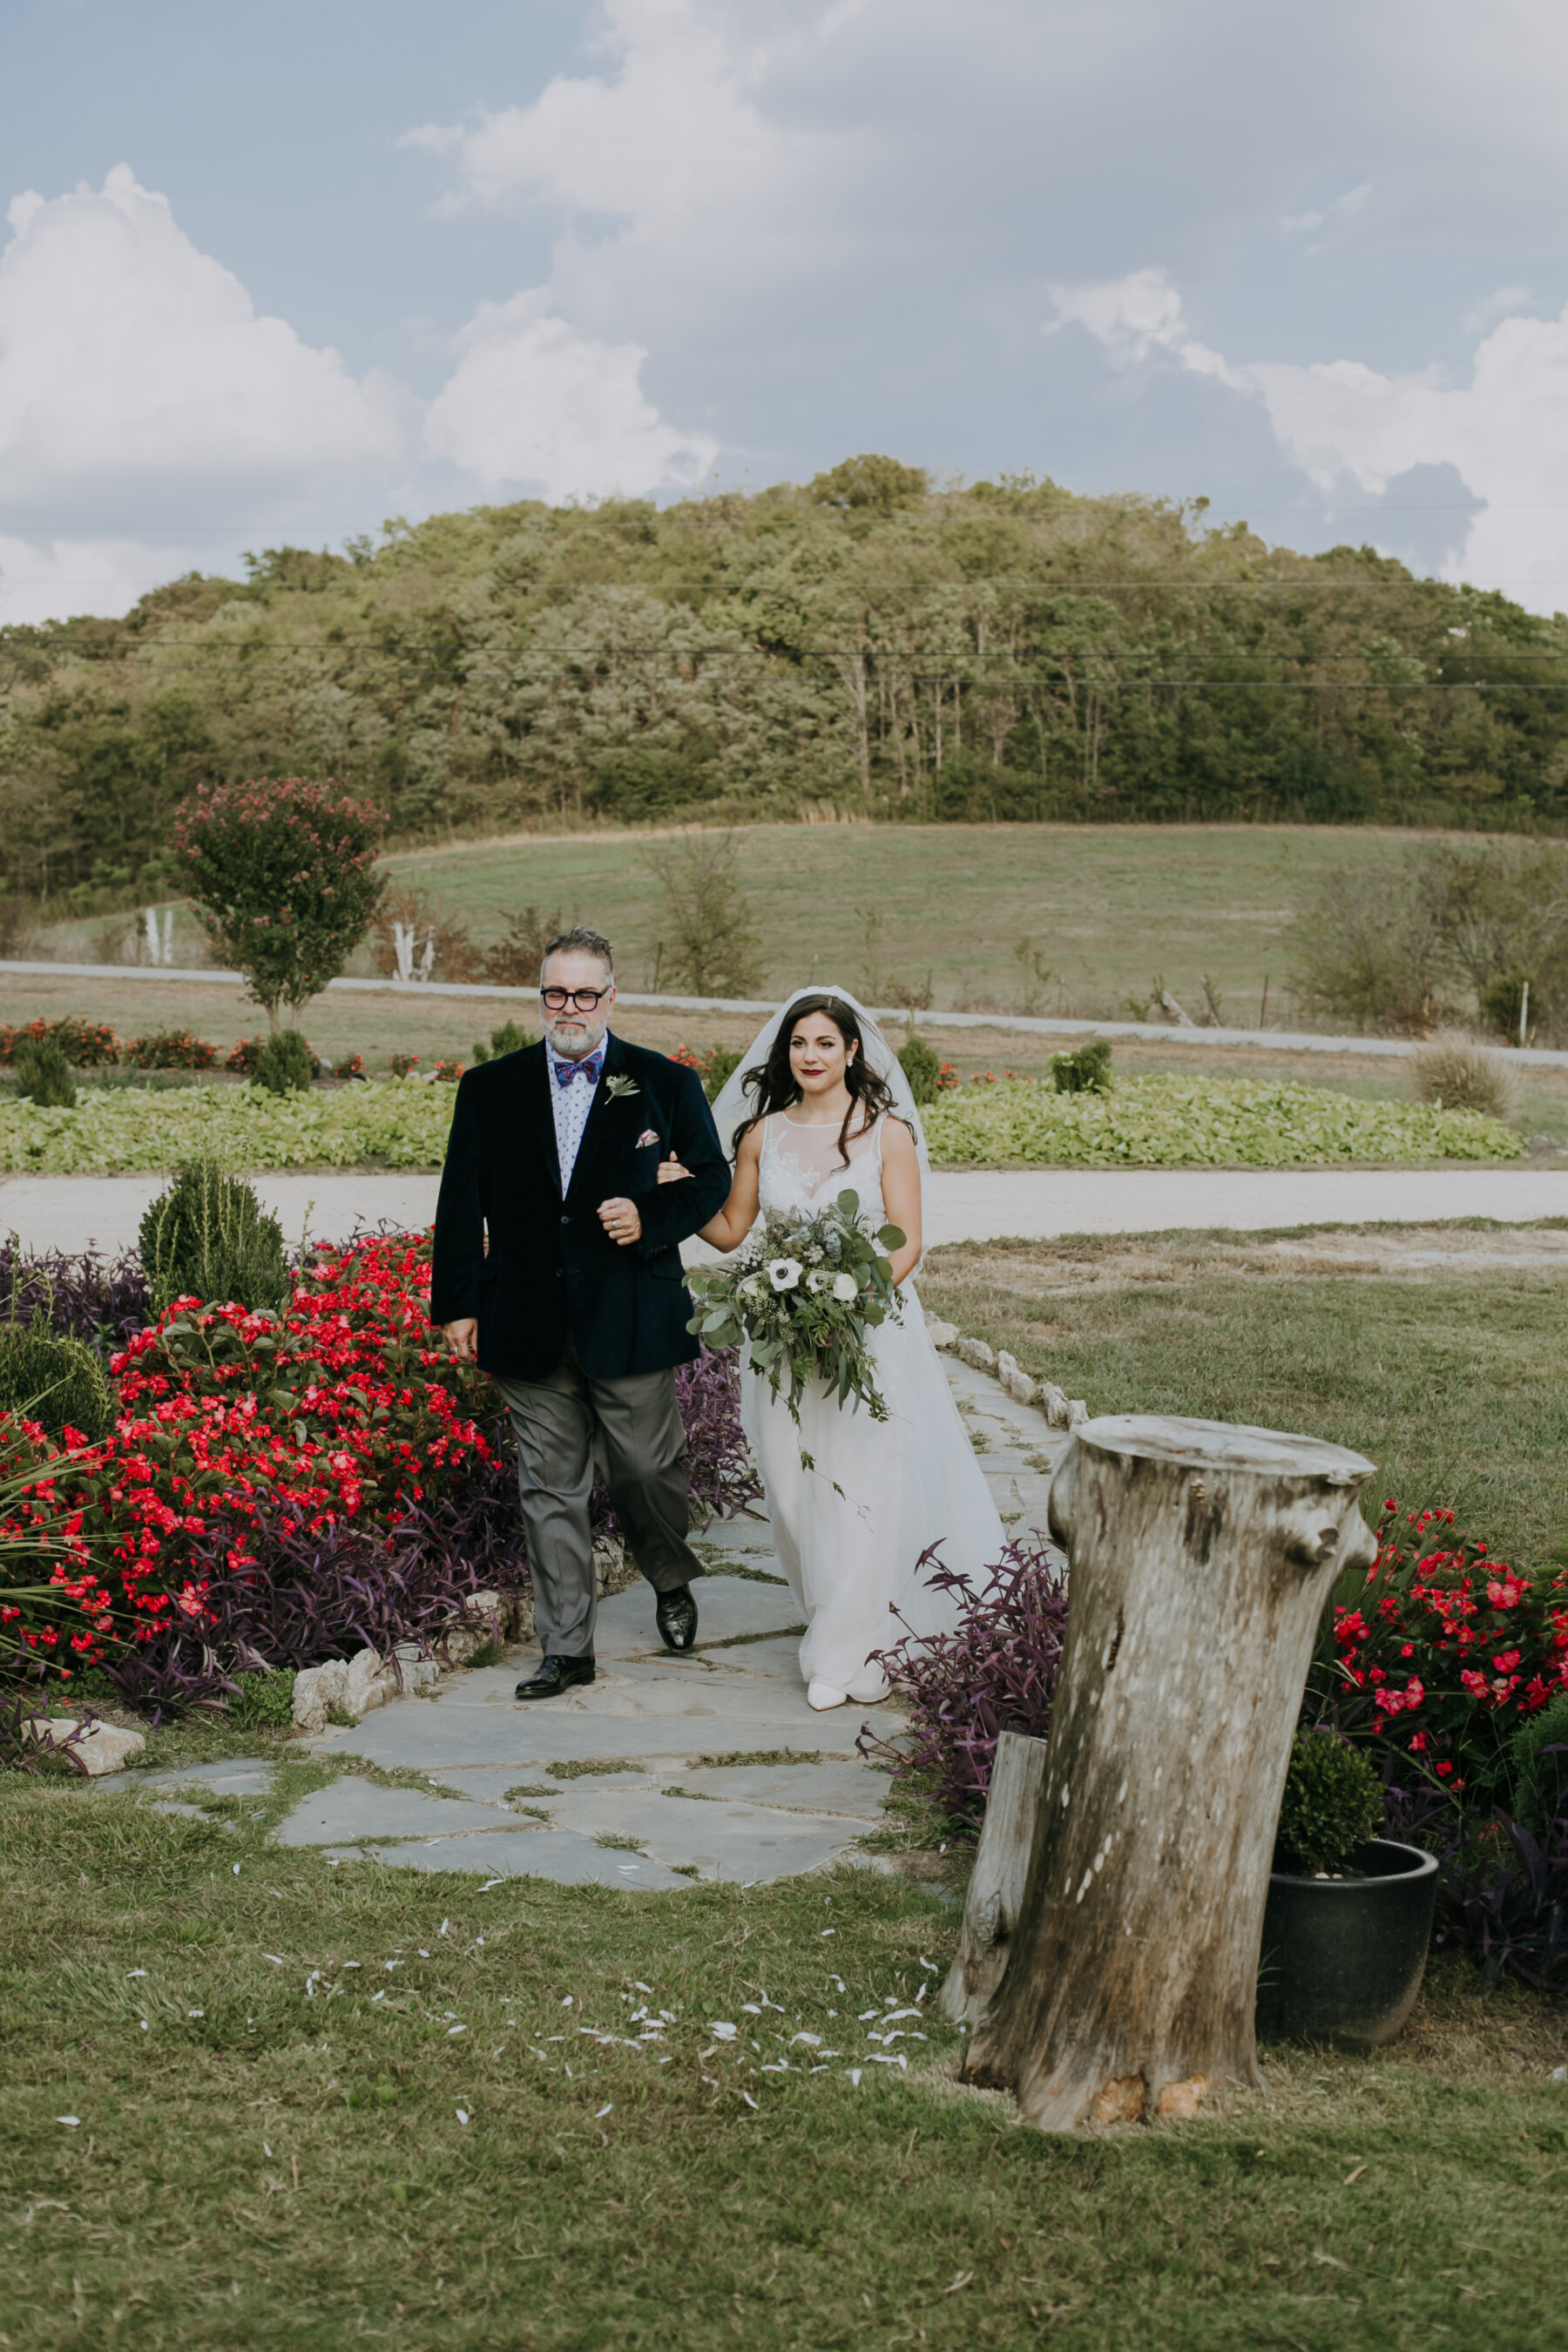 Nashville Wedding with Beautiful Views by Teale Photography featured on Nashville Bride Guide